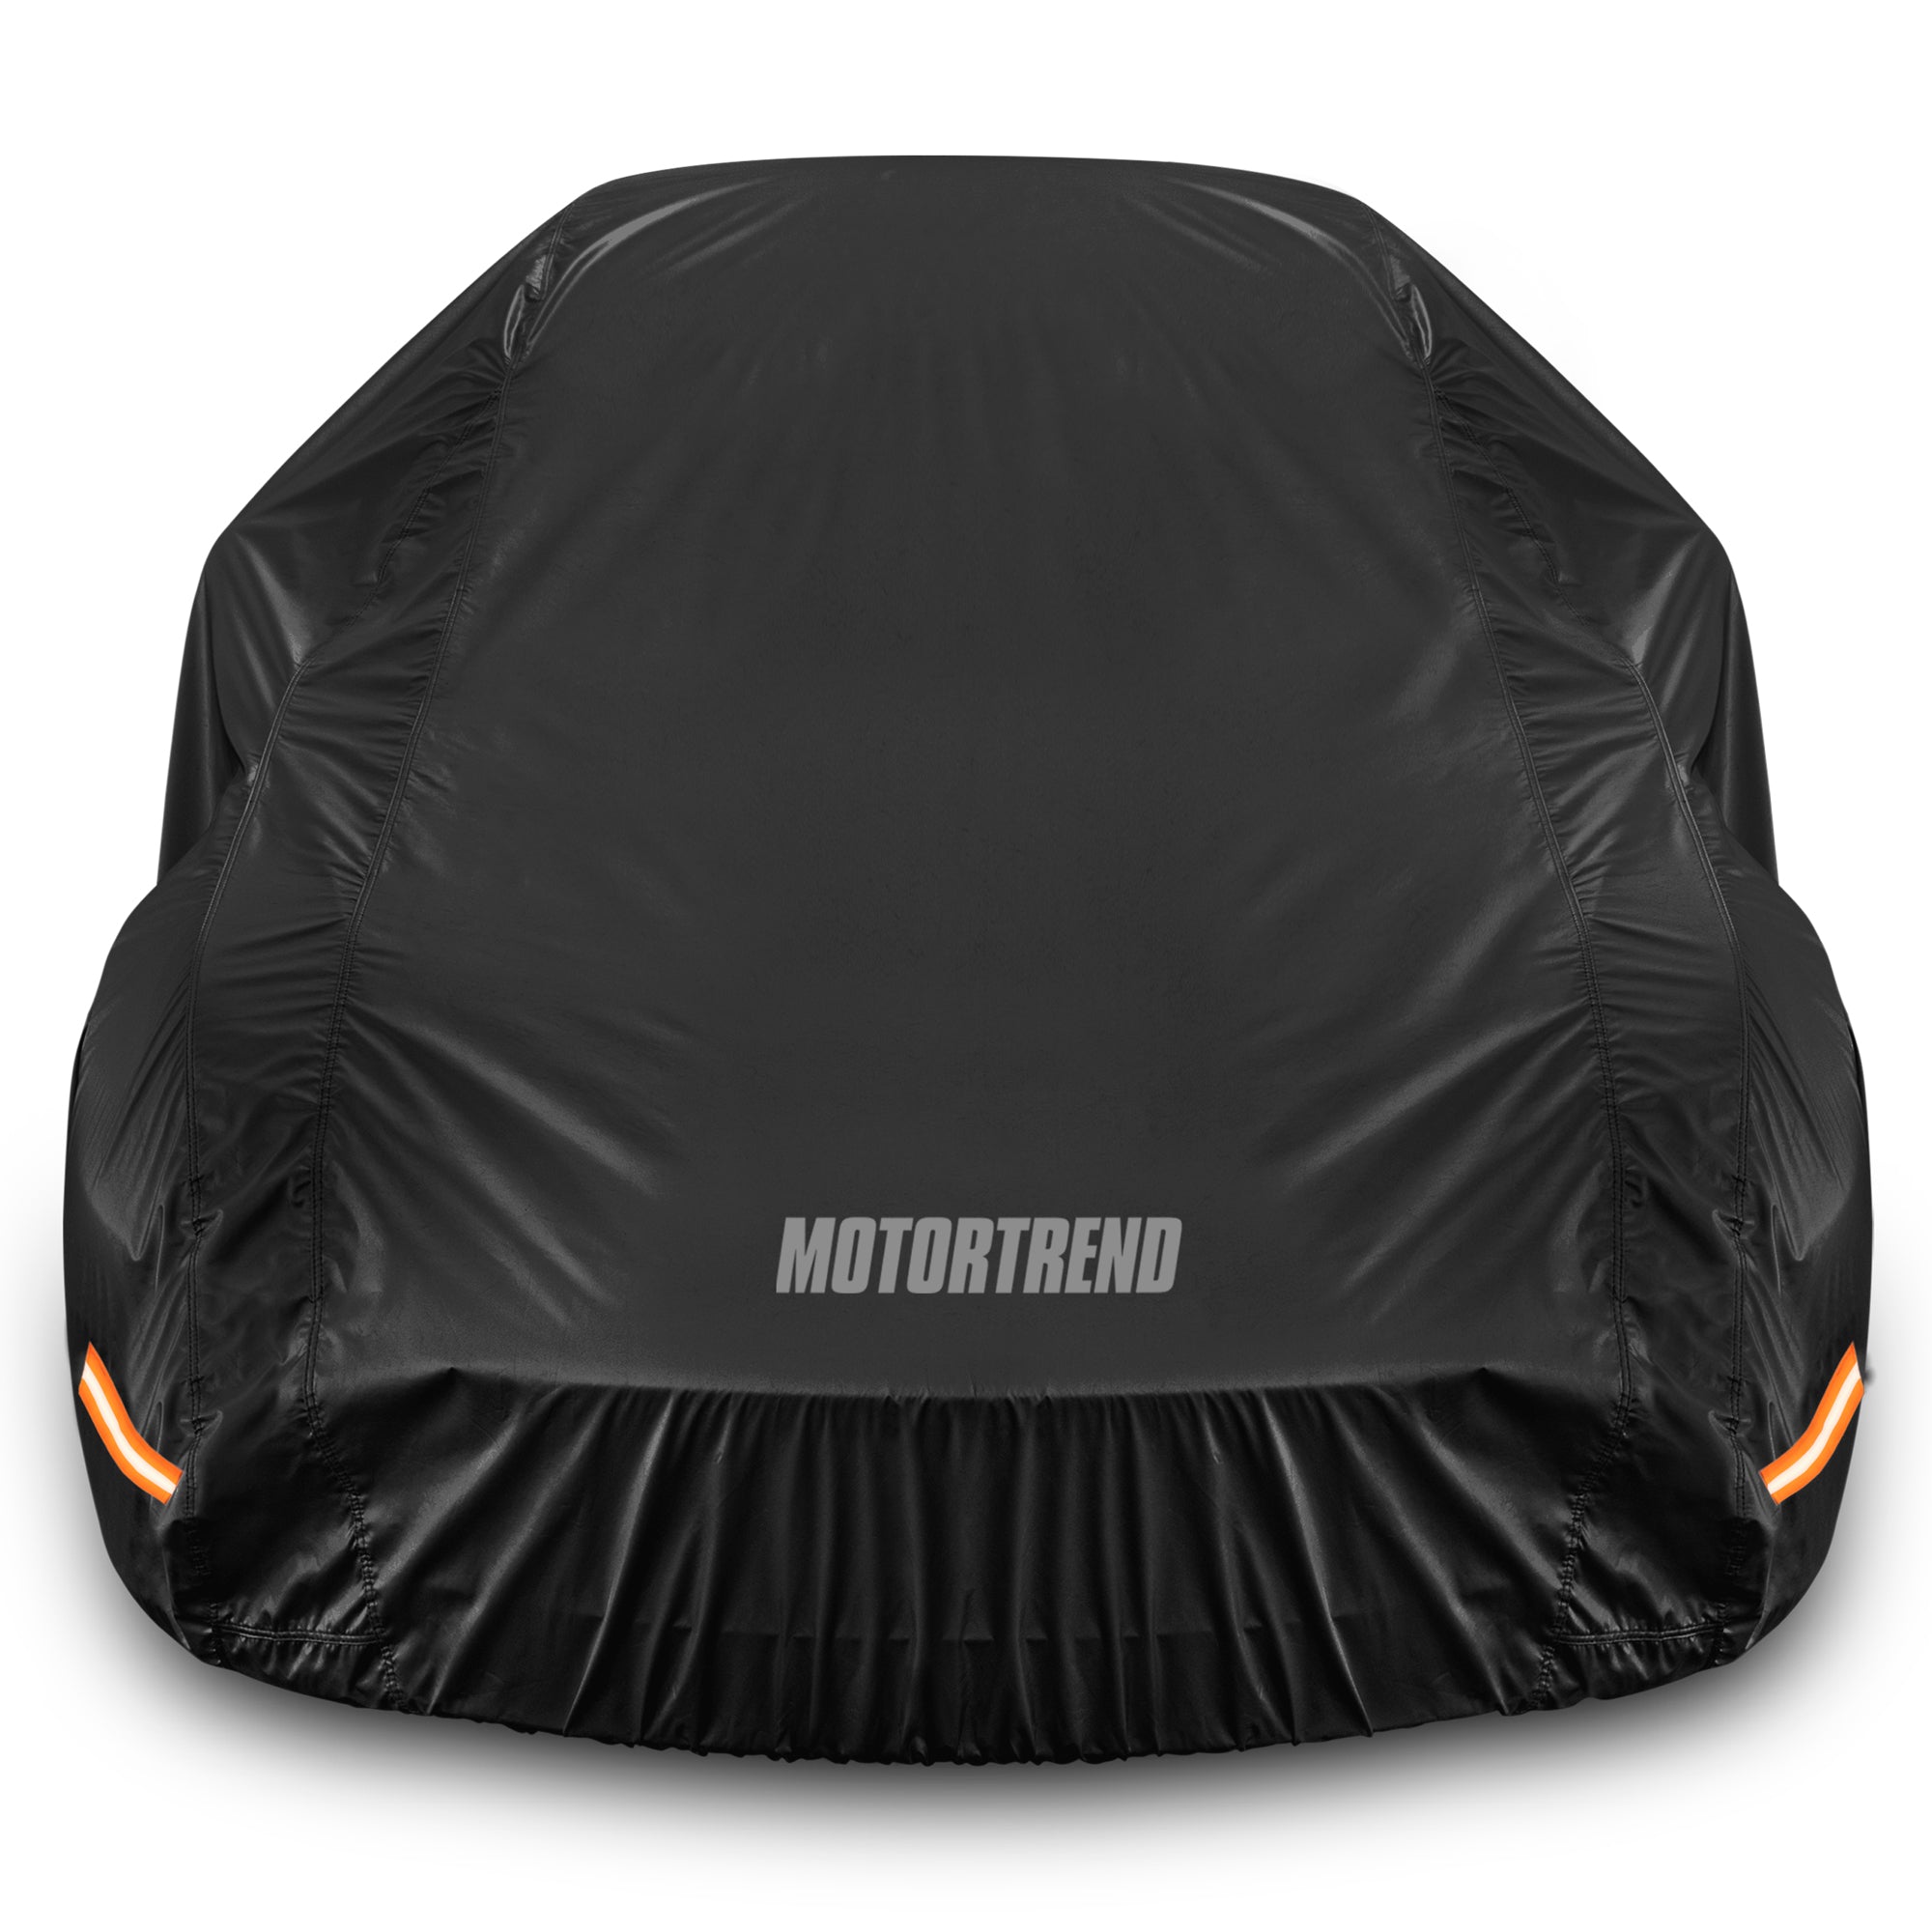 Motor Trend SafeKeeper All Weather Black Car Cover - Advanced Protection Formula - Waterproof 6-Layer for Outdoor Use, for Sedans Up to 210" L